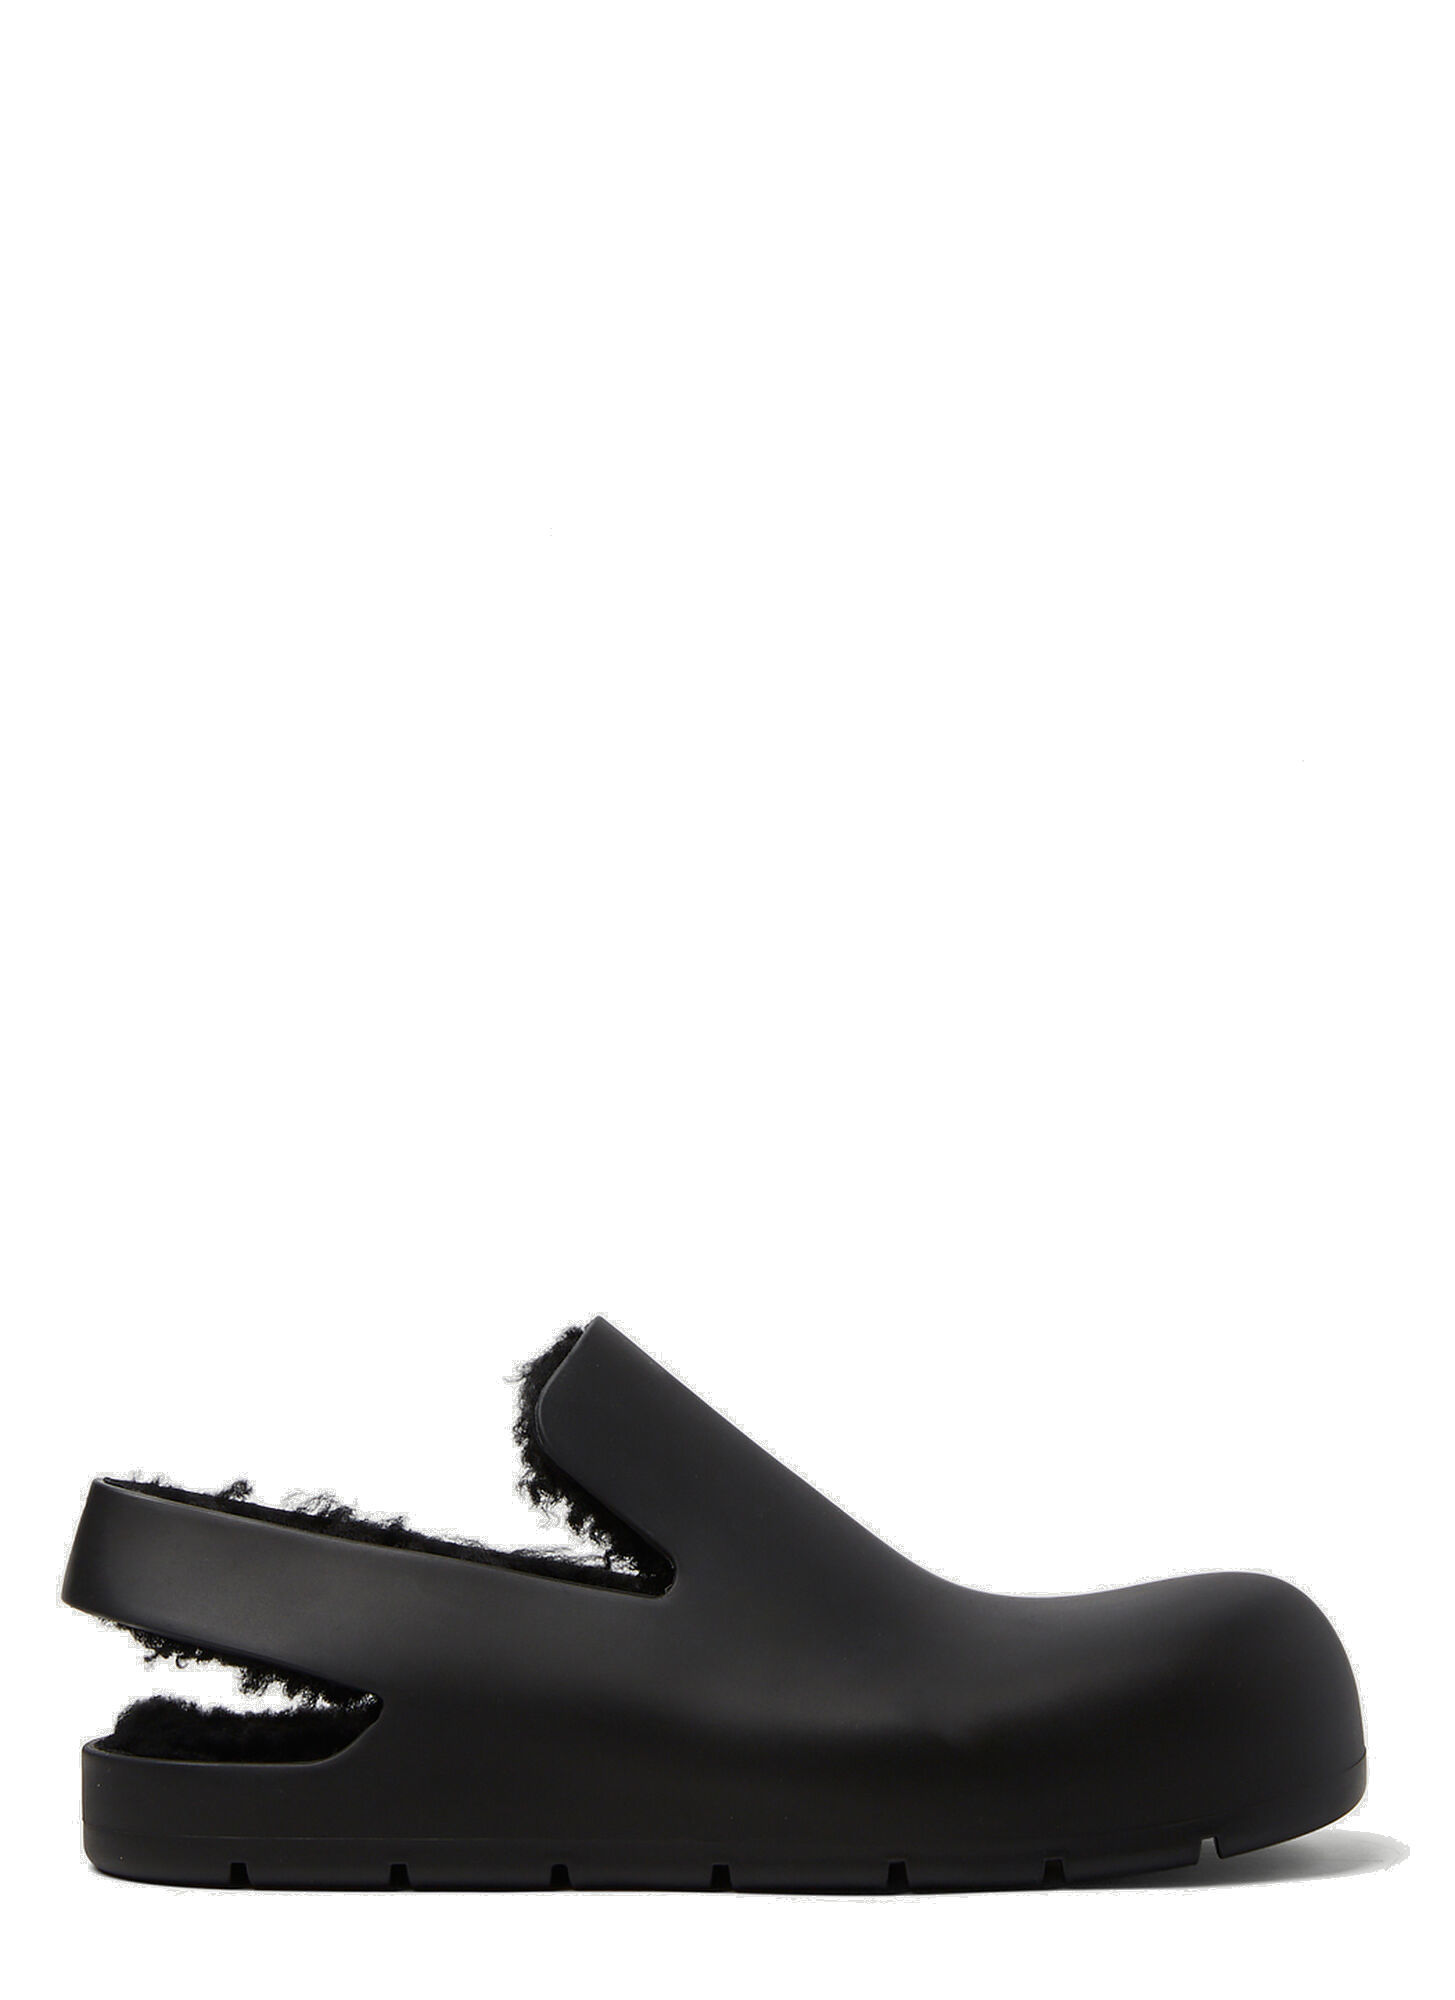 Photo: Puddle Slingback Shoes in Black